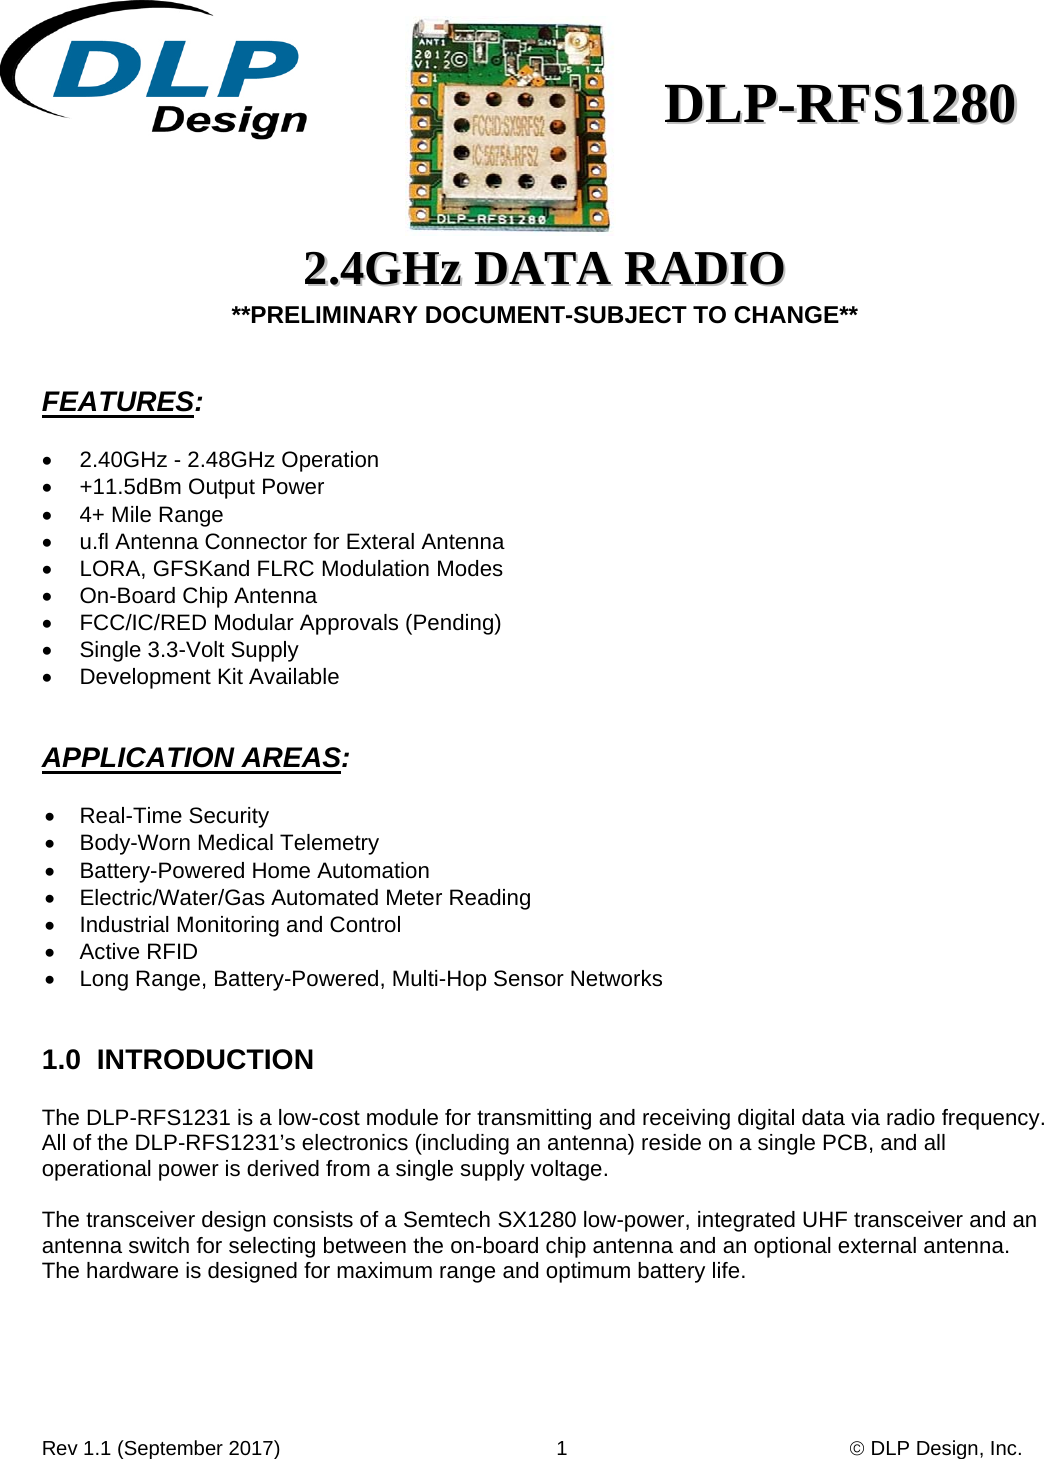 Rev 1.1 (September 2017)                                                 1                                                   DLP Design, Inc. DDLLPP--RRFFSS11228800    22..44GGHHzz  DDAATTAA  RRAADDIIOO  **PRELIMINARY DOCUMENT-SUBJECT TO CHANGE**   FEATURES:    2.40GHz - 2.48GHz Operation   +11.5dBm Output Power   4+ Mile Range    u.fl Antenna Connector for Exteral Antenna   LORA, GFSKand FLRC Modulation Modes   On-Board Chip Antenna    FCC/IC/RED Modular Approvals (Pending)   Single 3.3-Volt Supply   Development Kit Available   APPLICATION AREAS:   Real-Time Security   Body-Worn Medical Telemetry   Battery-Powered Home Automation   Electric/Water/Gas Automated Meter Reading   Industrial Monitoring and Control  Active RFID   Long Range, Battery-Powered, Multi-Hop Sensor Networks   1.0  INTRODUCTION    The DLP-RFS1231 is a low-cost module for transmitting and receiving digital data via radio frequency.  All of the DLP-RFS1231’s electronics (including an antenna) reside on a single PCB, and all operational power is derived from a single supply voltage.  The transceiver design consists of a Semtech SX1280 low-power, integrated UHF transceiver and an antenna switch for selecting between the on-board chip antenna and an optional external antenna.  The hardware is designed for maximum range and optimum battery life.      